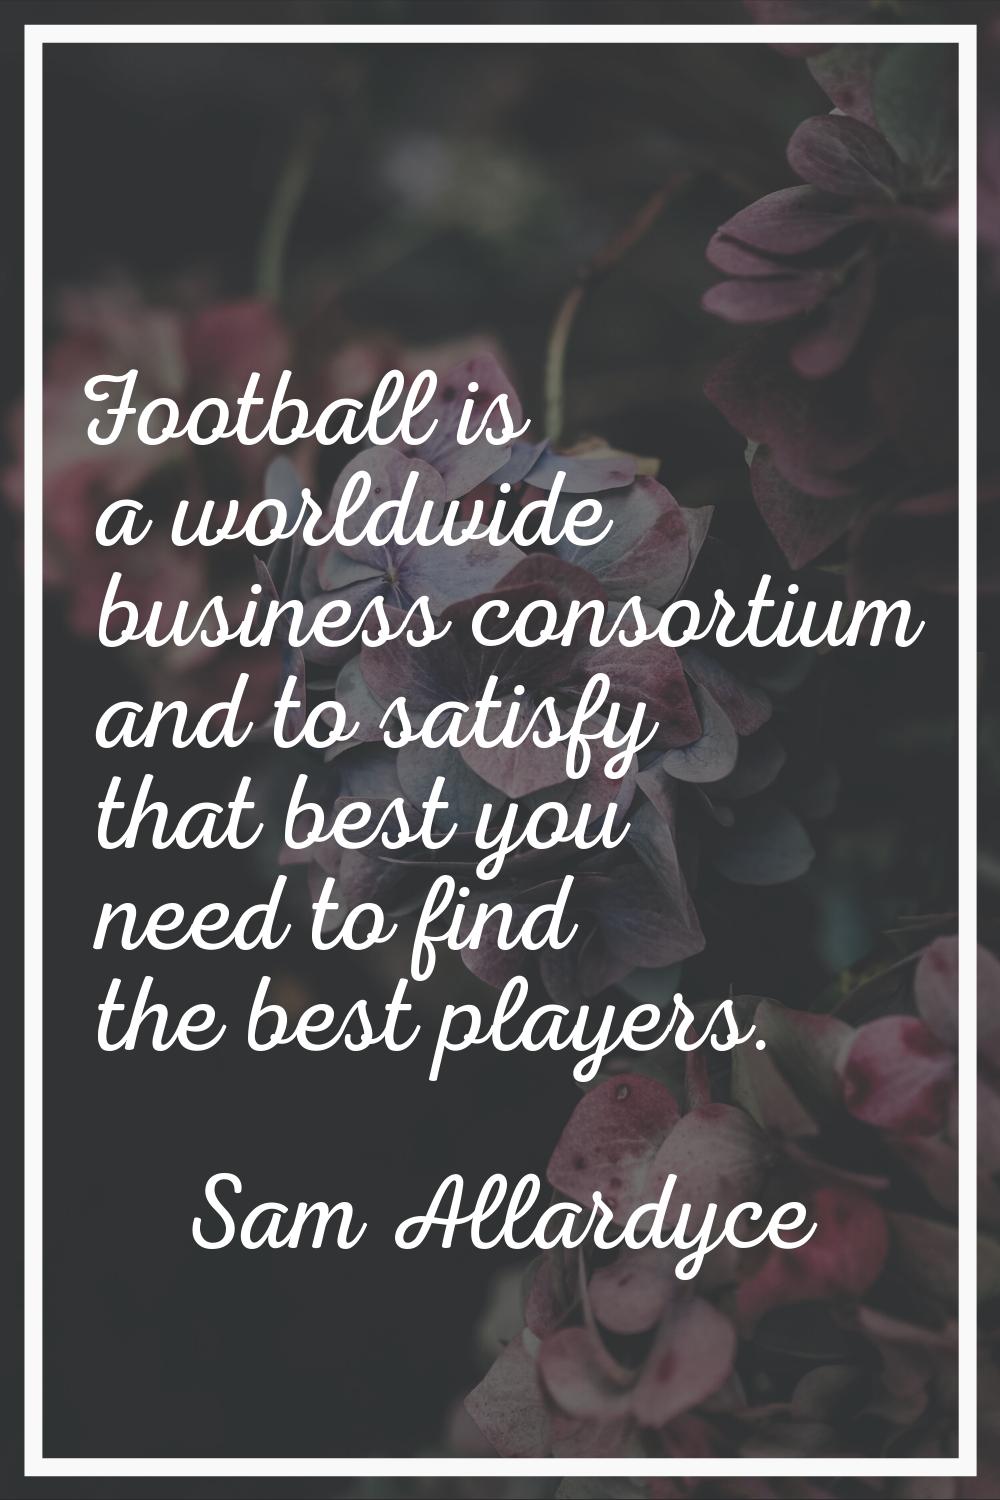 Football is a worldwide business consortium and to satisfy that best you need to find the best play